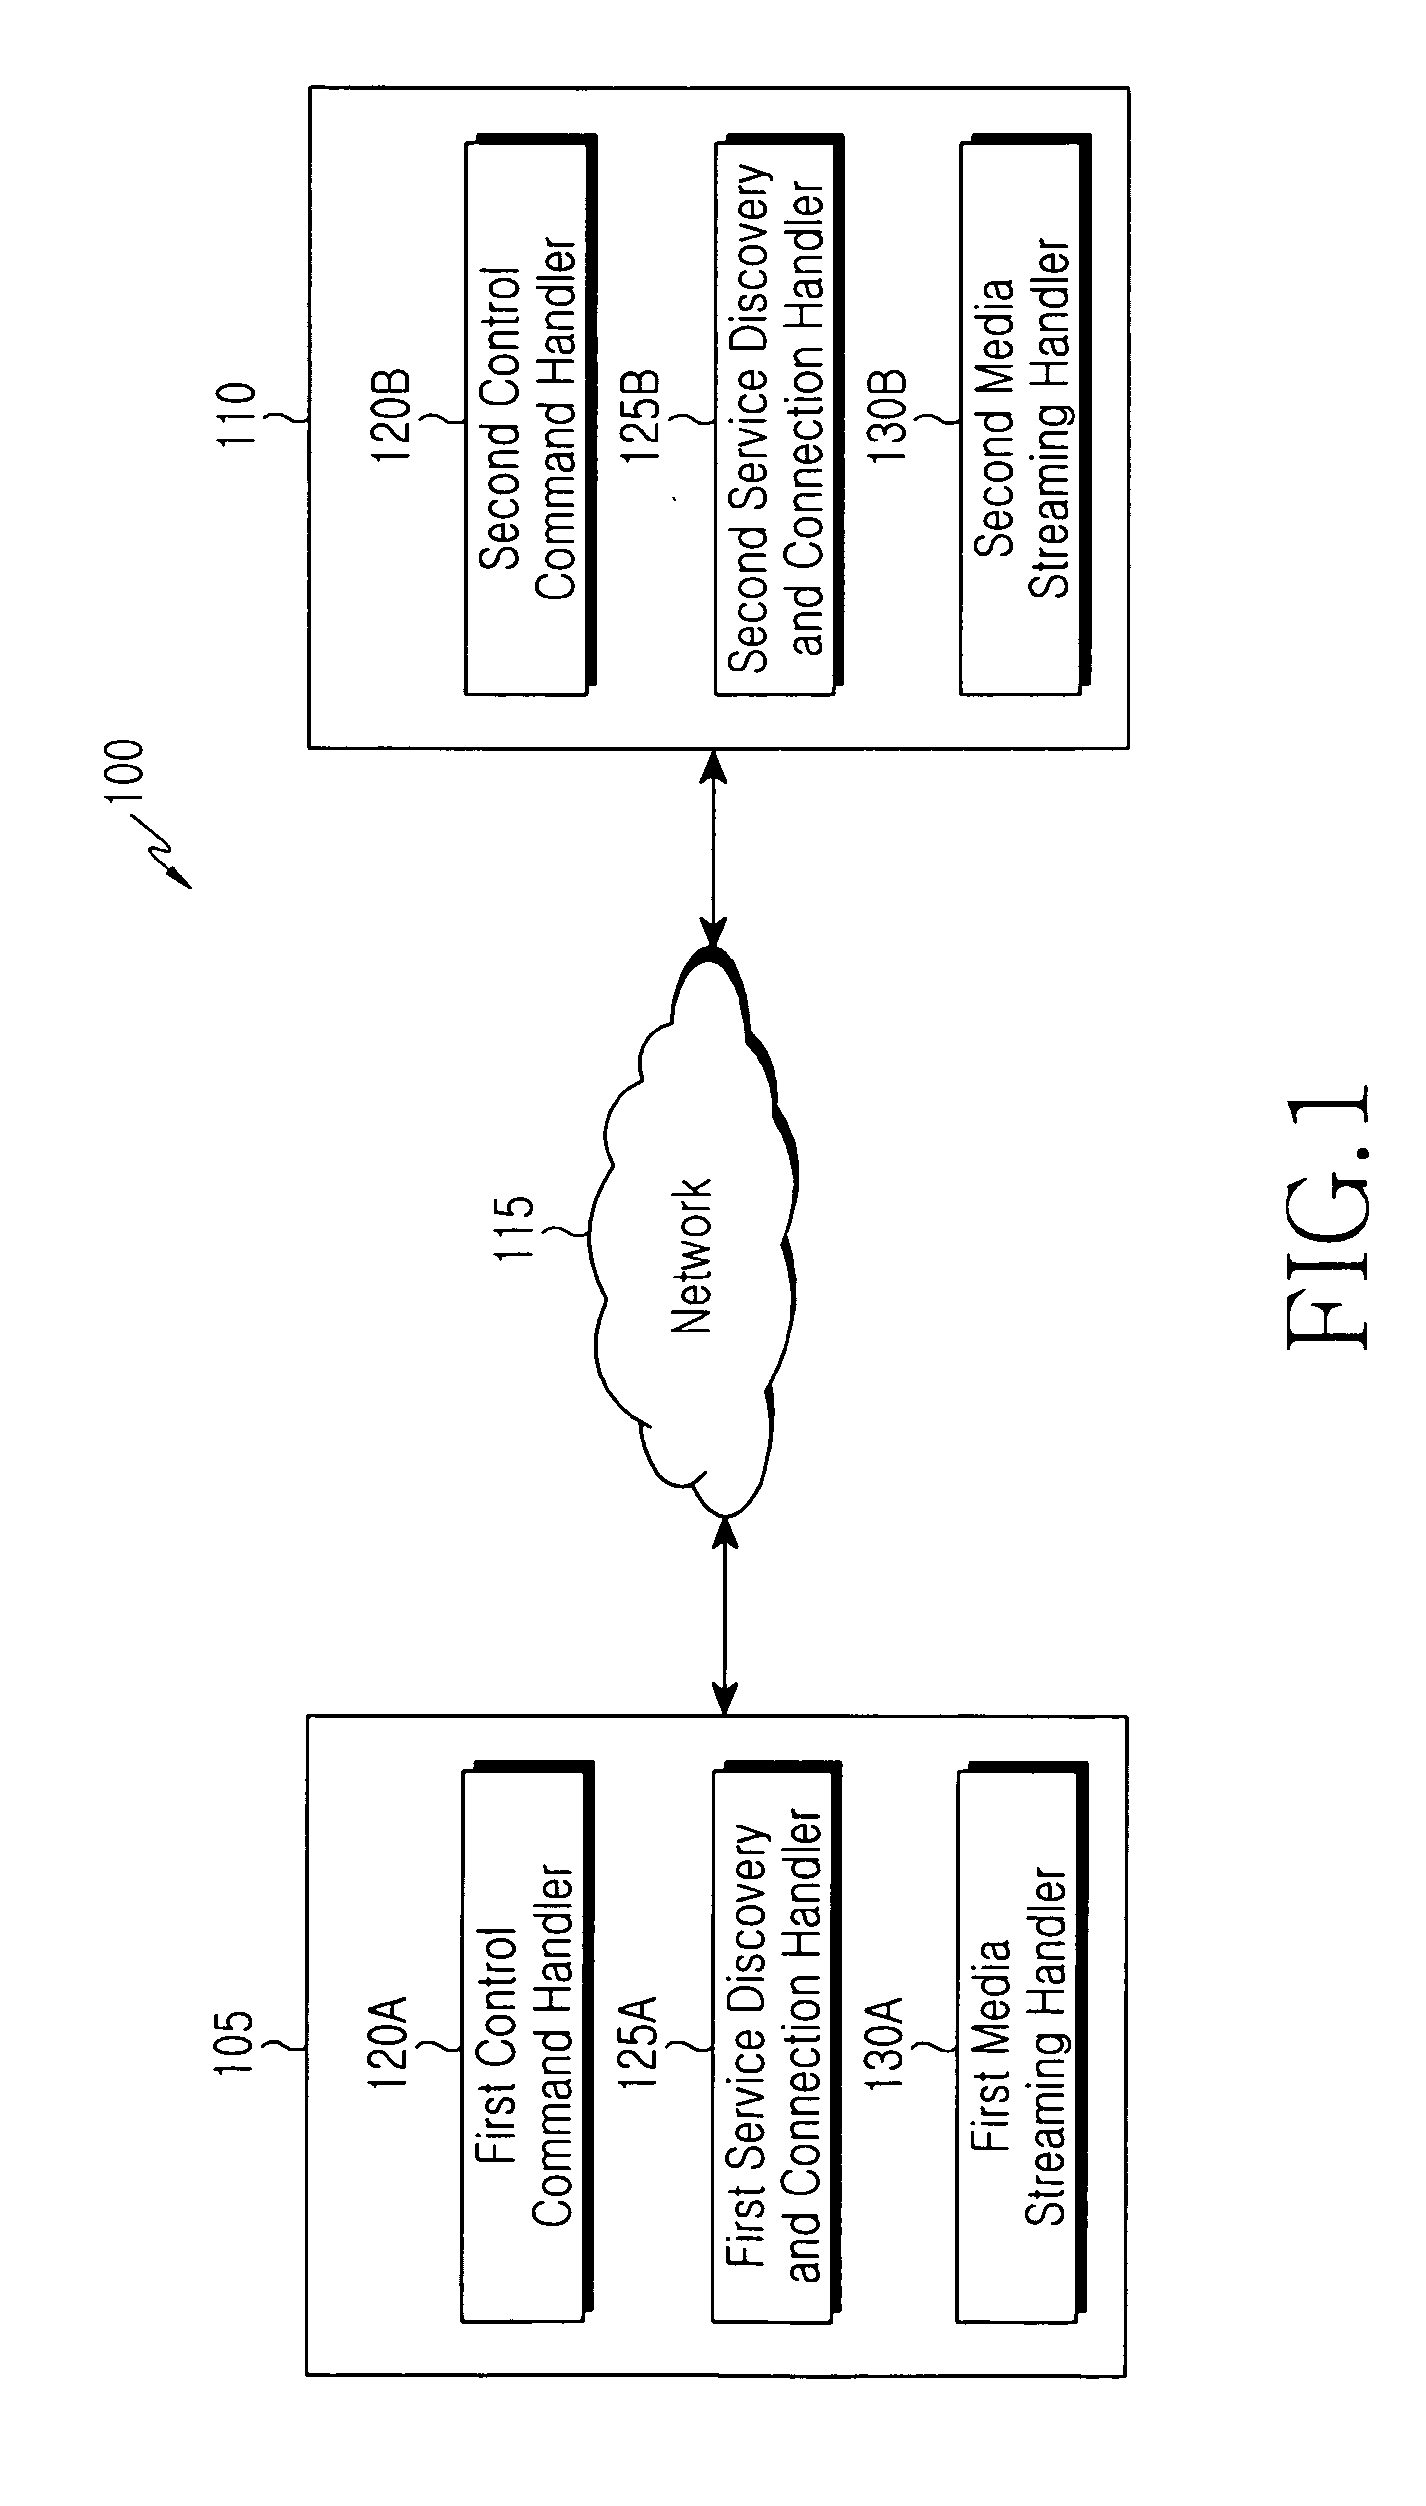 Method and system for managing an imaging device by an electronic device located remotely to the imaging device